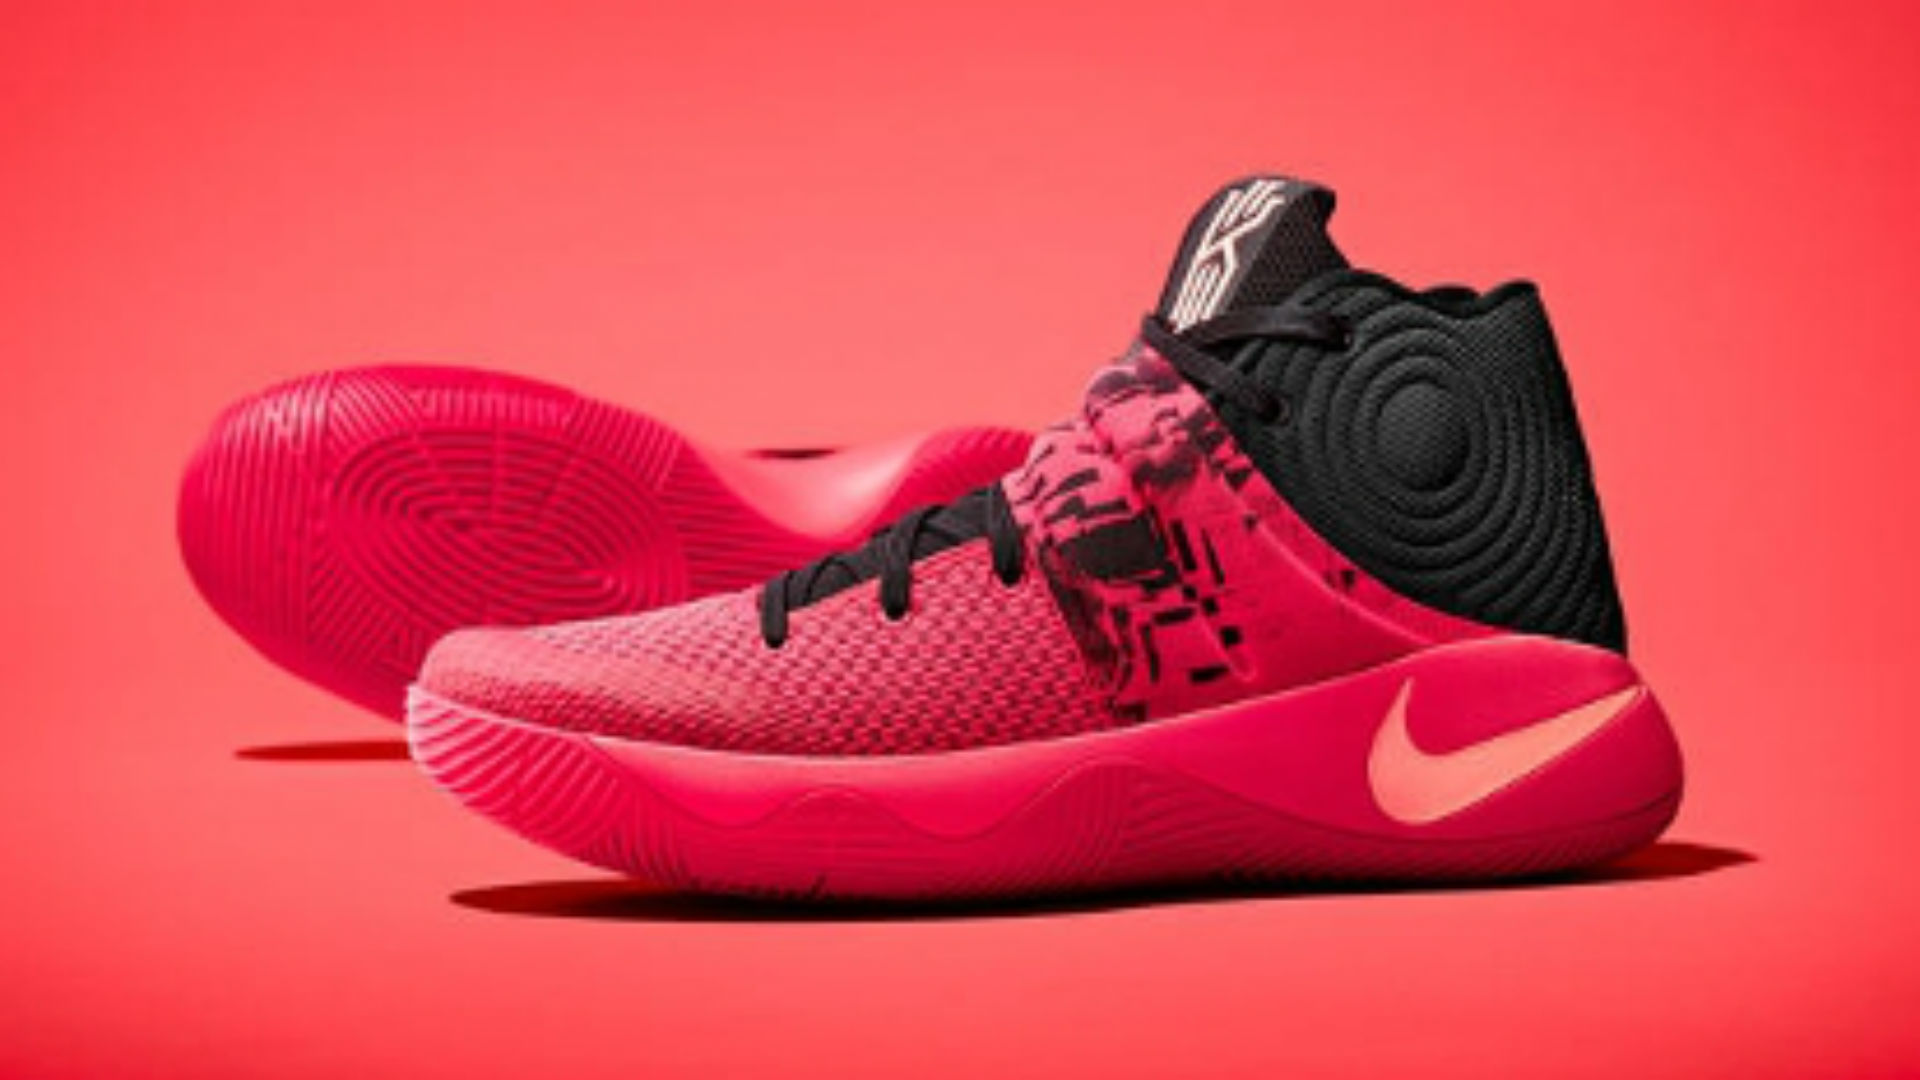 kyrie limited edition